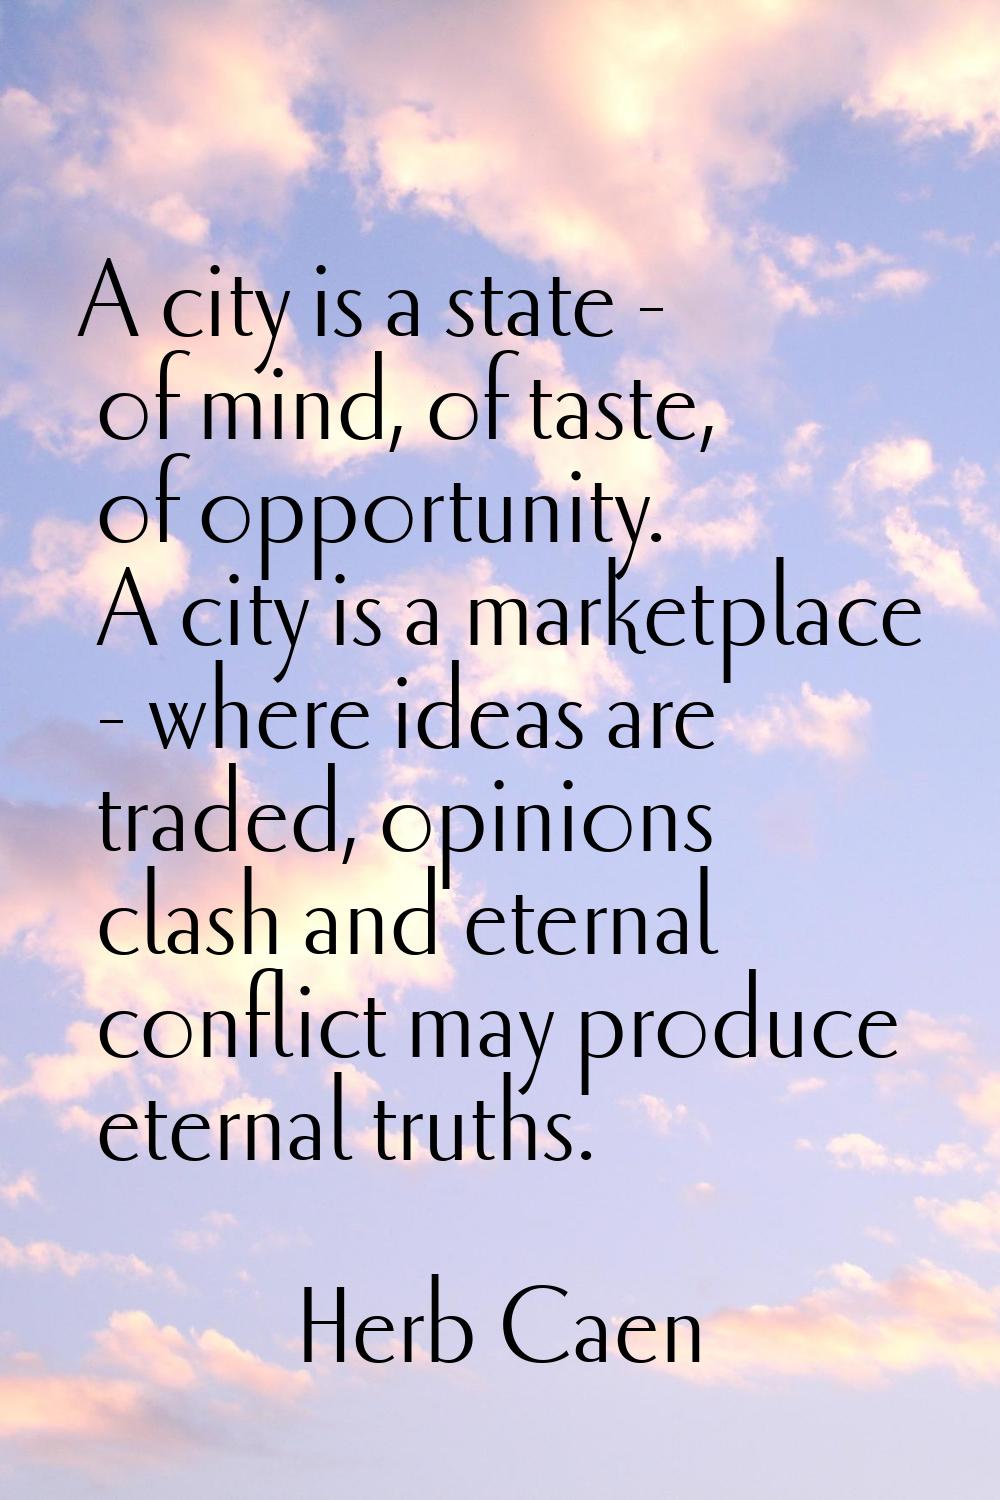 A city is a state - of mind, of taste, of opportunity. A city is a marketplace - where ideas are tr